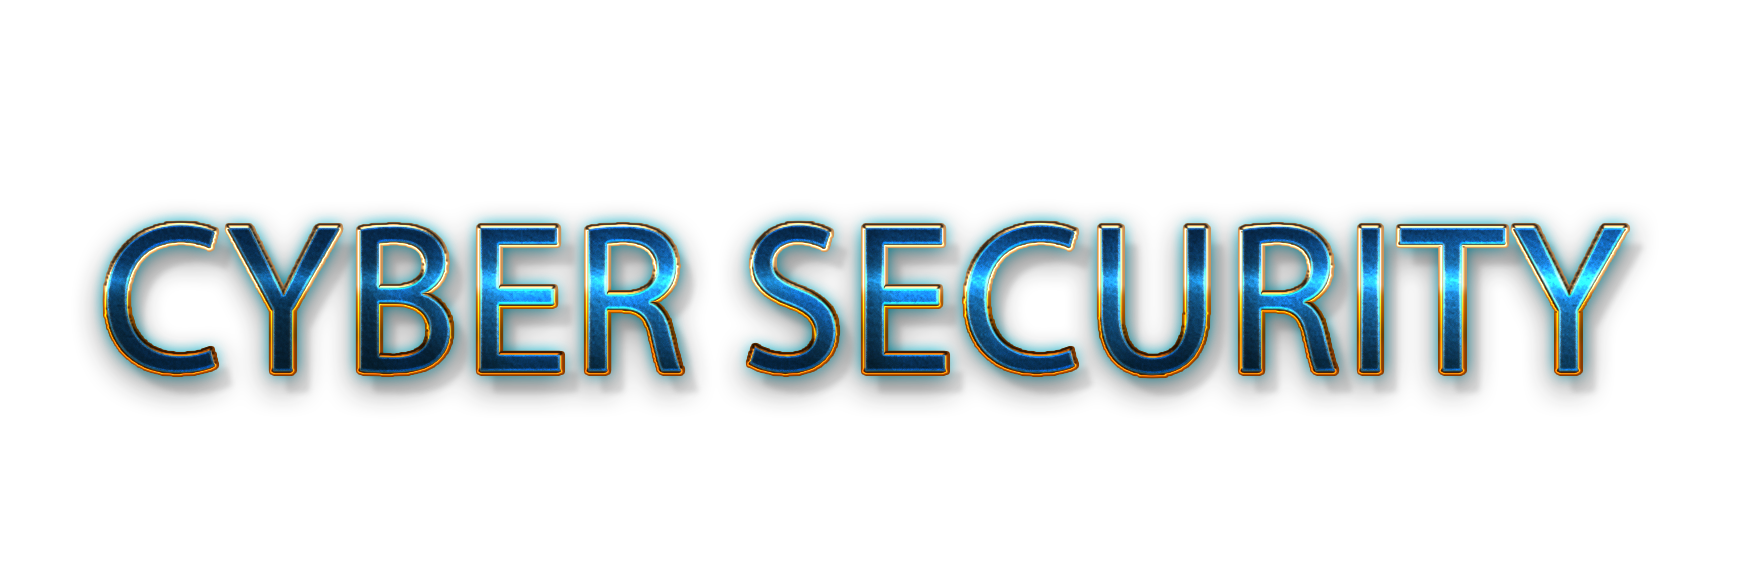 Cyber Security png, word Cyber Security png, Cyber Security word png, Cyber Security text png, Cyber Security typography PNG images